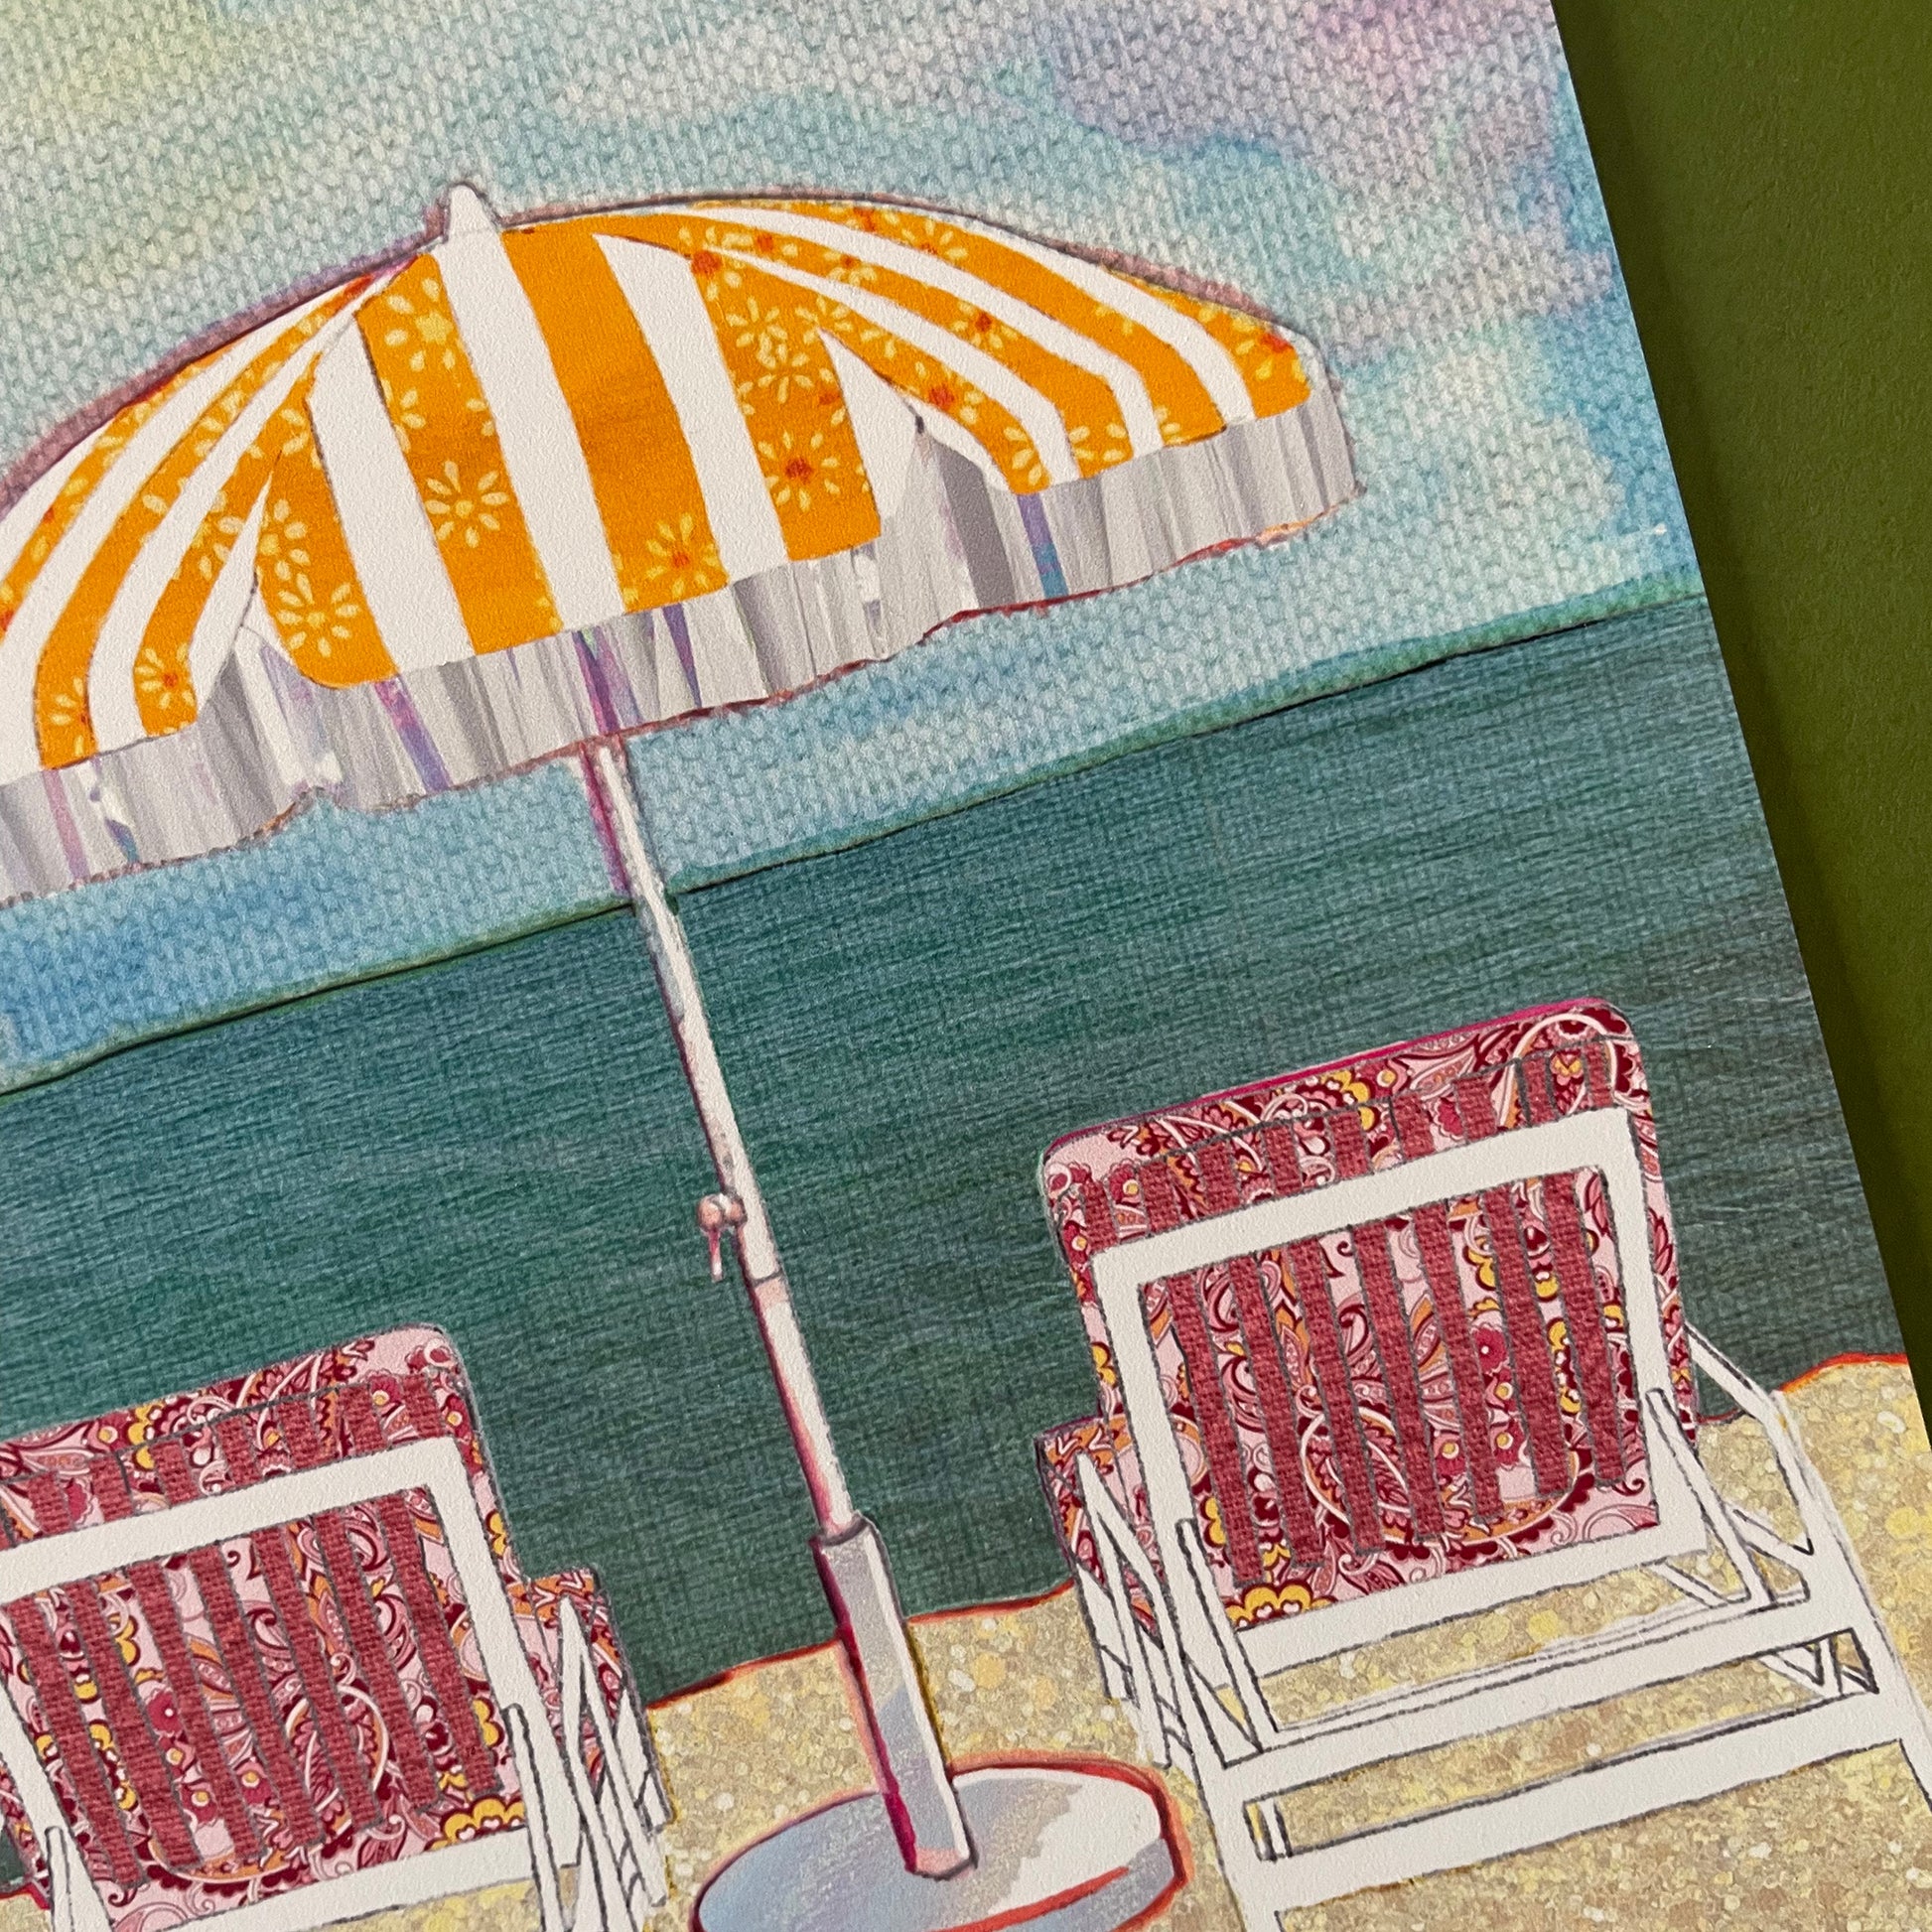 Close up image of the detail and texture of an illustrated beach scene featuring 2 chairs and a parasol by the sea